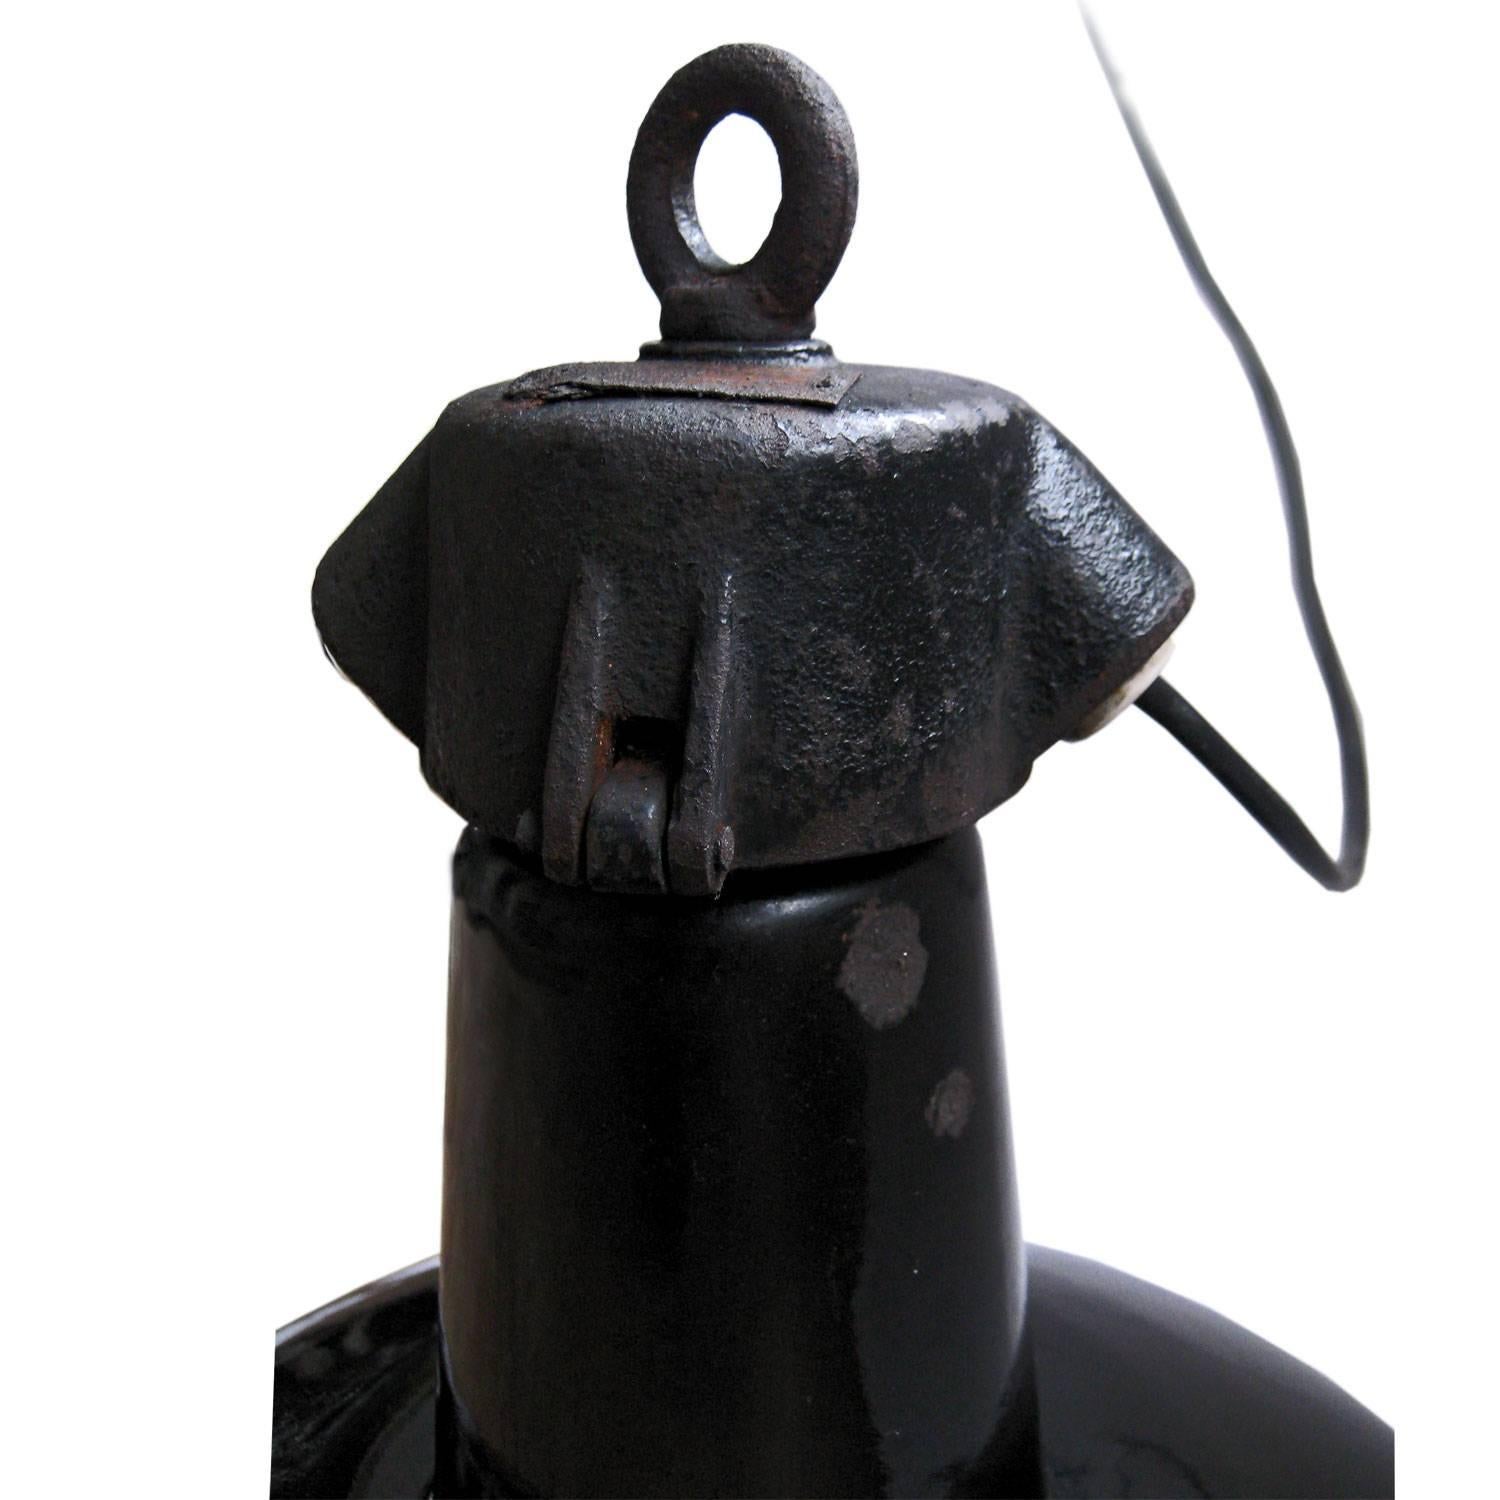 1930s black enamel factory light. Cast iron top.

Weight: 2.0 kg / 4.4 lb

Priced per individual item. All lamps have been made suitable by international standards for incandescent light bulbs, energy-efficient and LED bulbs. E26/E27 bulb